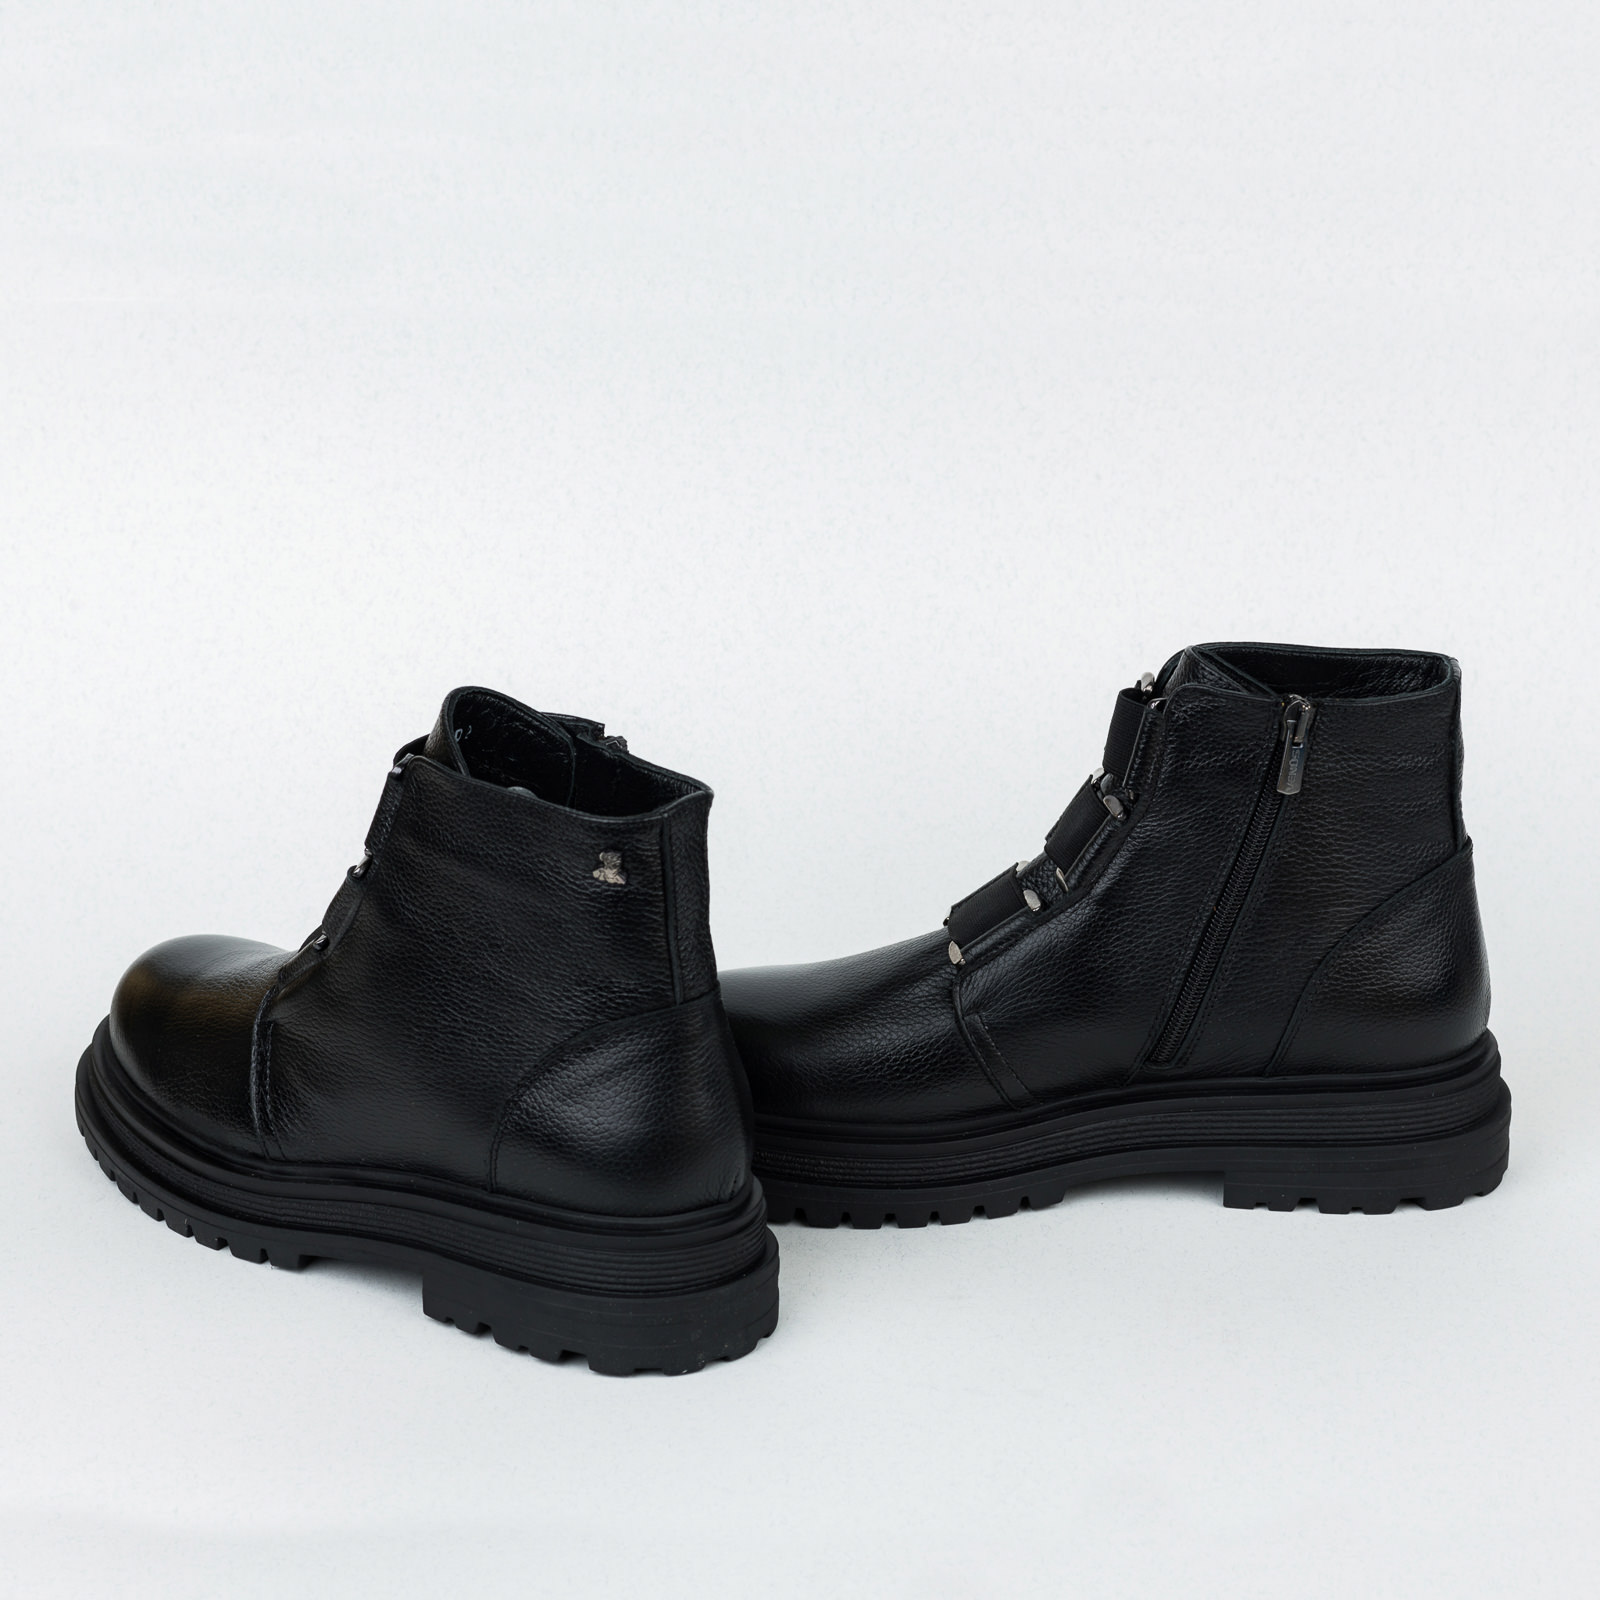 Leather ankle boots B441 - BLACK